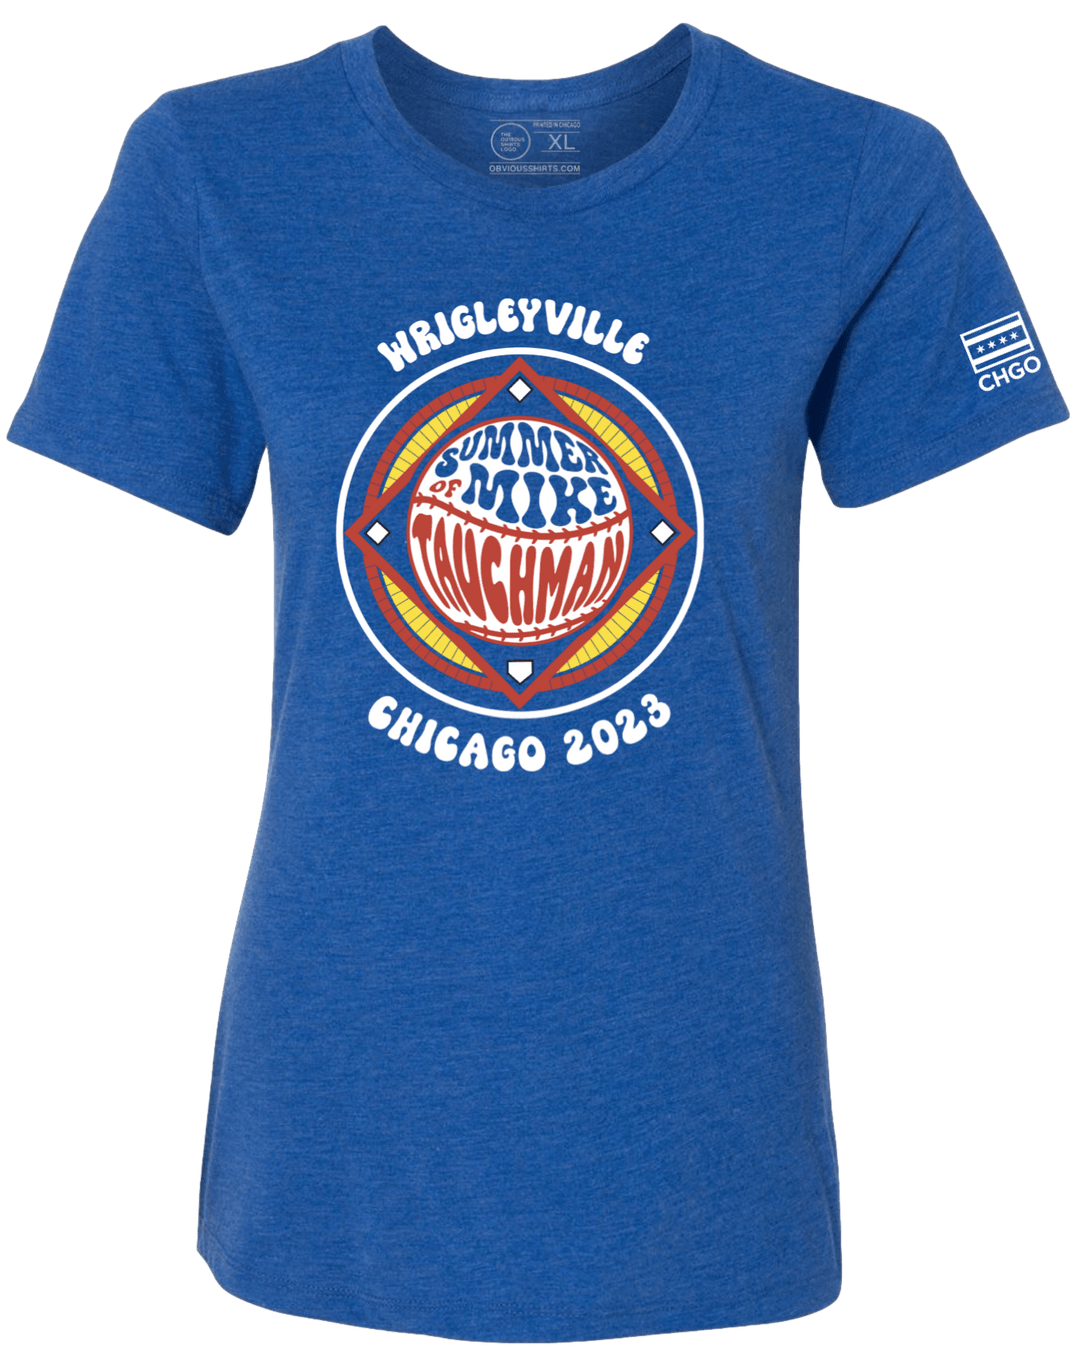 SUMMER OF MIKE TAUCHMAN (WOMEN'S CREW) - OBVIOUS SHIRTS